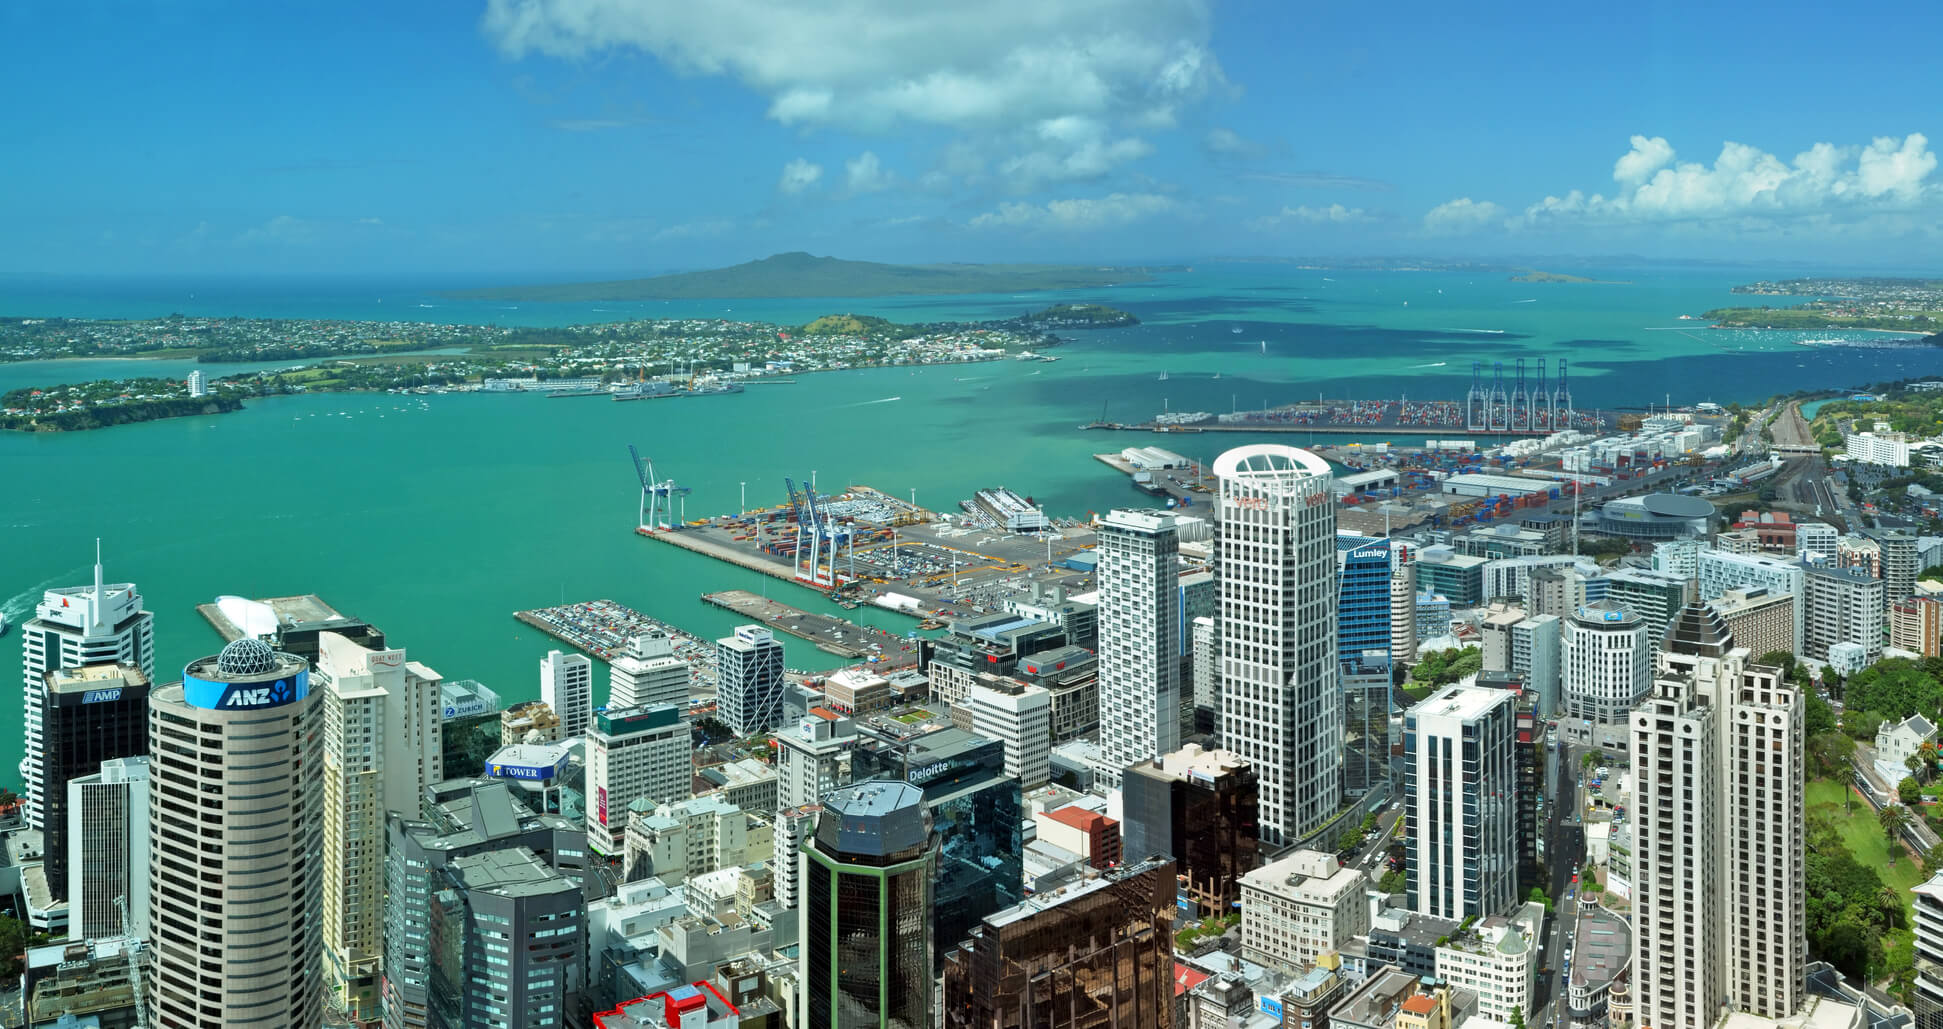 EXPIRED** Germany to Auckland, New Zealand from only €509 roundtrip